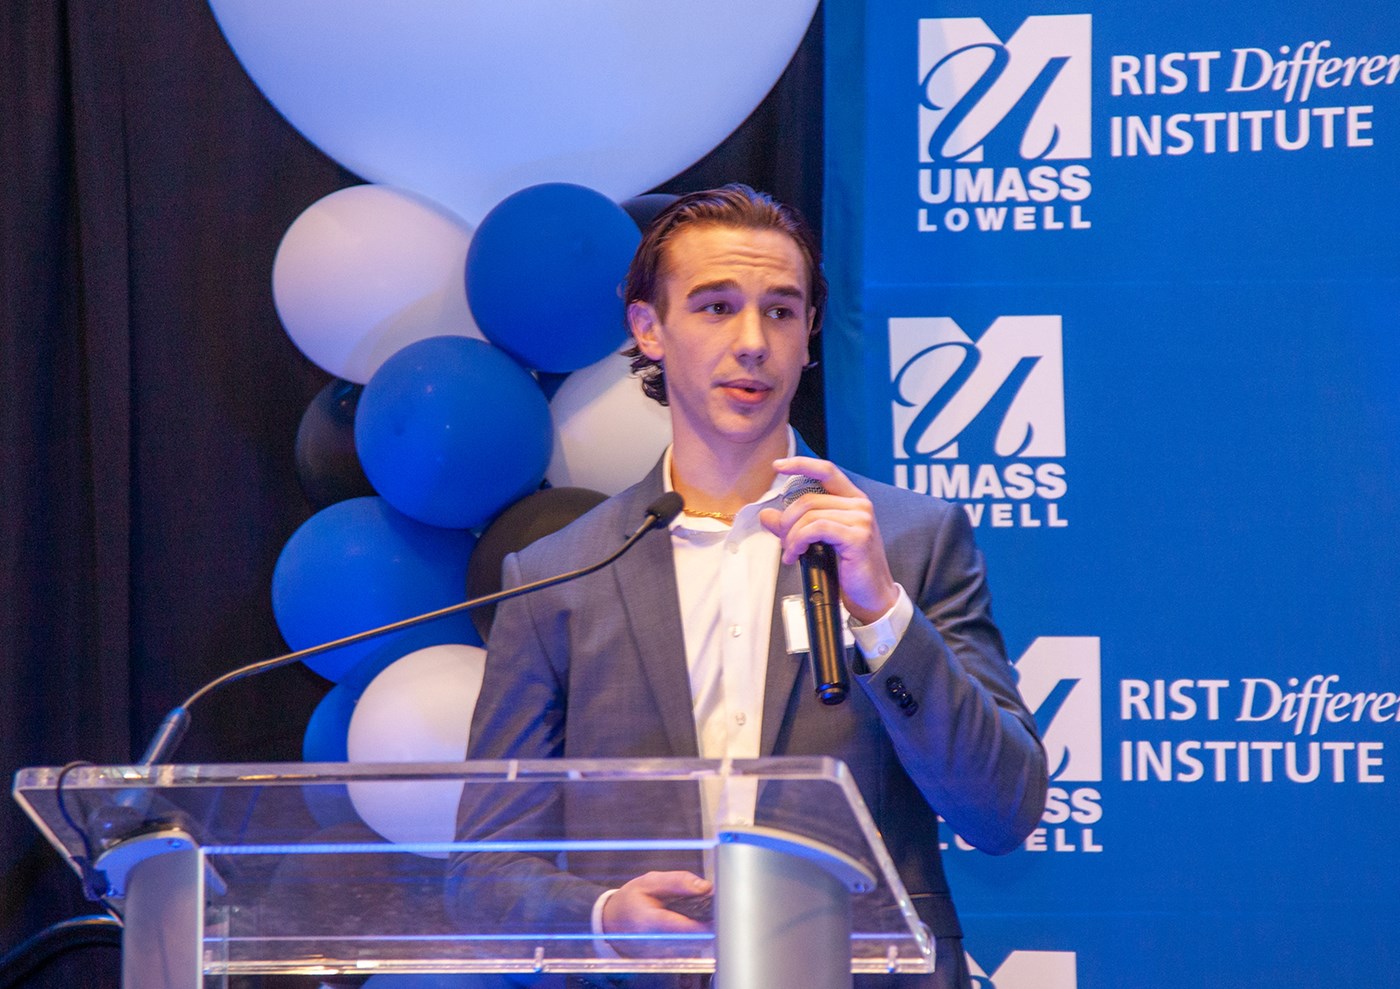 One of the members StockToMe team holding a microphone and speaking in front of blue UMass Lowell backdrop.